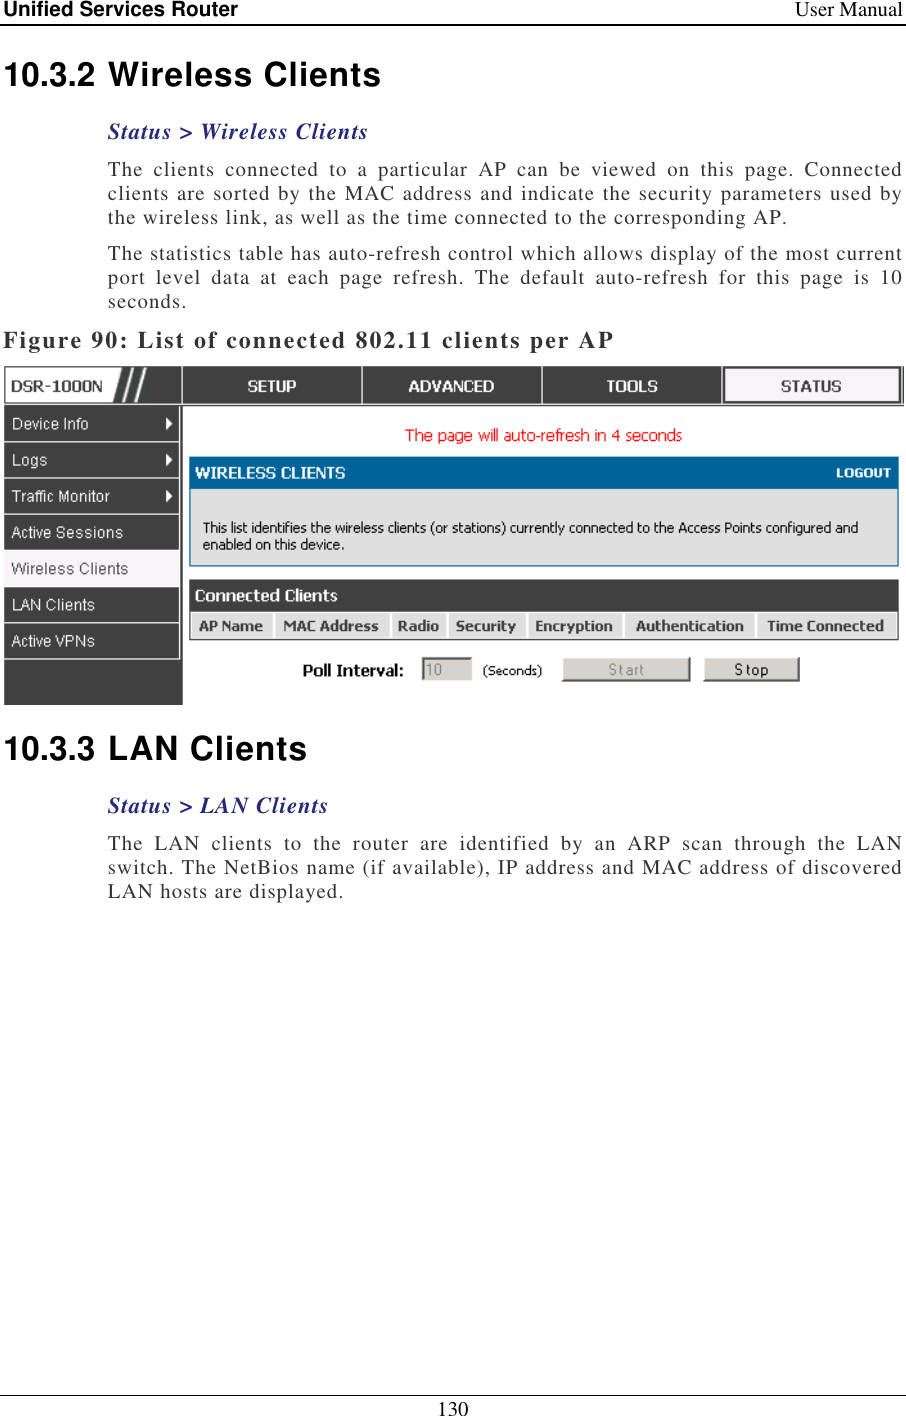 Unified Services Router    User Manual 130  10.3.2 Wireless Clients Status &gt; Wireless Clients The  clients  connected  to  a  particular  AP  can  be  viewed  on  this  page.  Connected clients are sorted by the MAC address and indicate the security parameters used by the wireless link, as well as the time connected to the corresponding AP.  The statistics table has auto-refresh control which allows display of the most current port  level  data  at  each  page  refresh.  The  default  auto-refresh  for  this  page  is  10 seconds.  Figure 90: List of connected 802.11 clients per AP  10.3.3 LAN Clients Status &gt; LAN Clients The  LAN  clients  to  the  router  are  identified  by  an  ARP  scan  through  the  LAN switch. The NetBios name (if available), IP address and MAC address of discovered LAN hosts are displayed.  